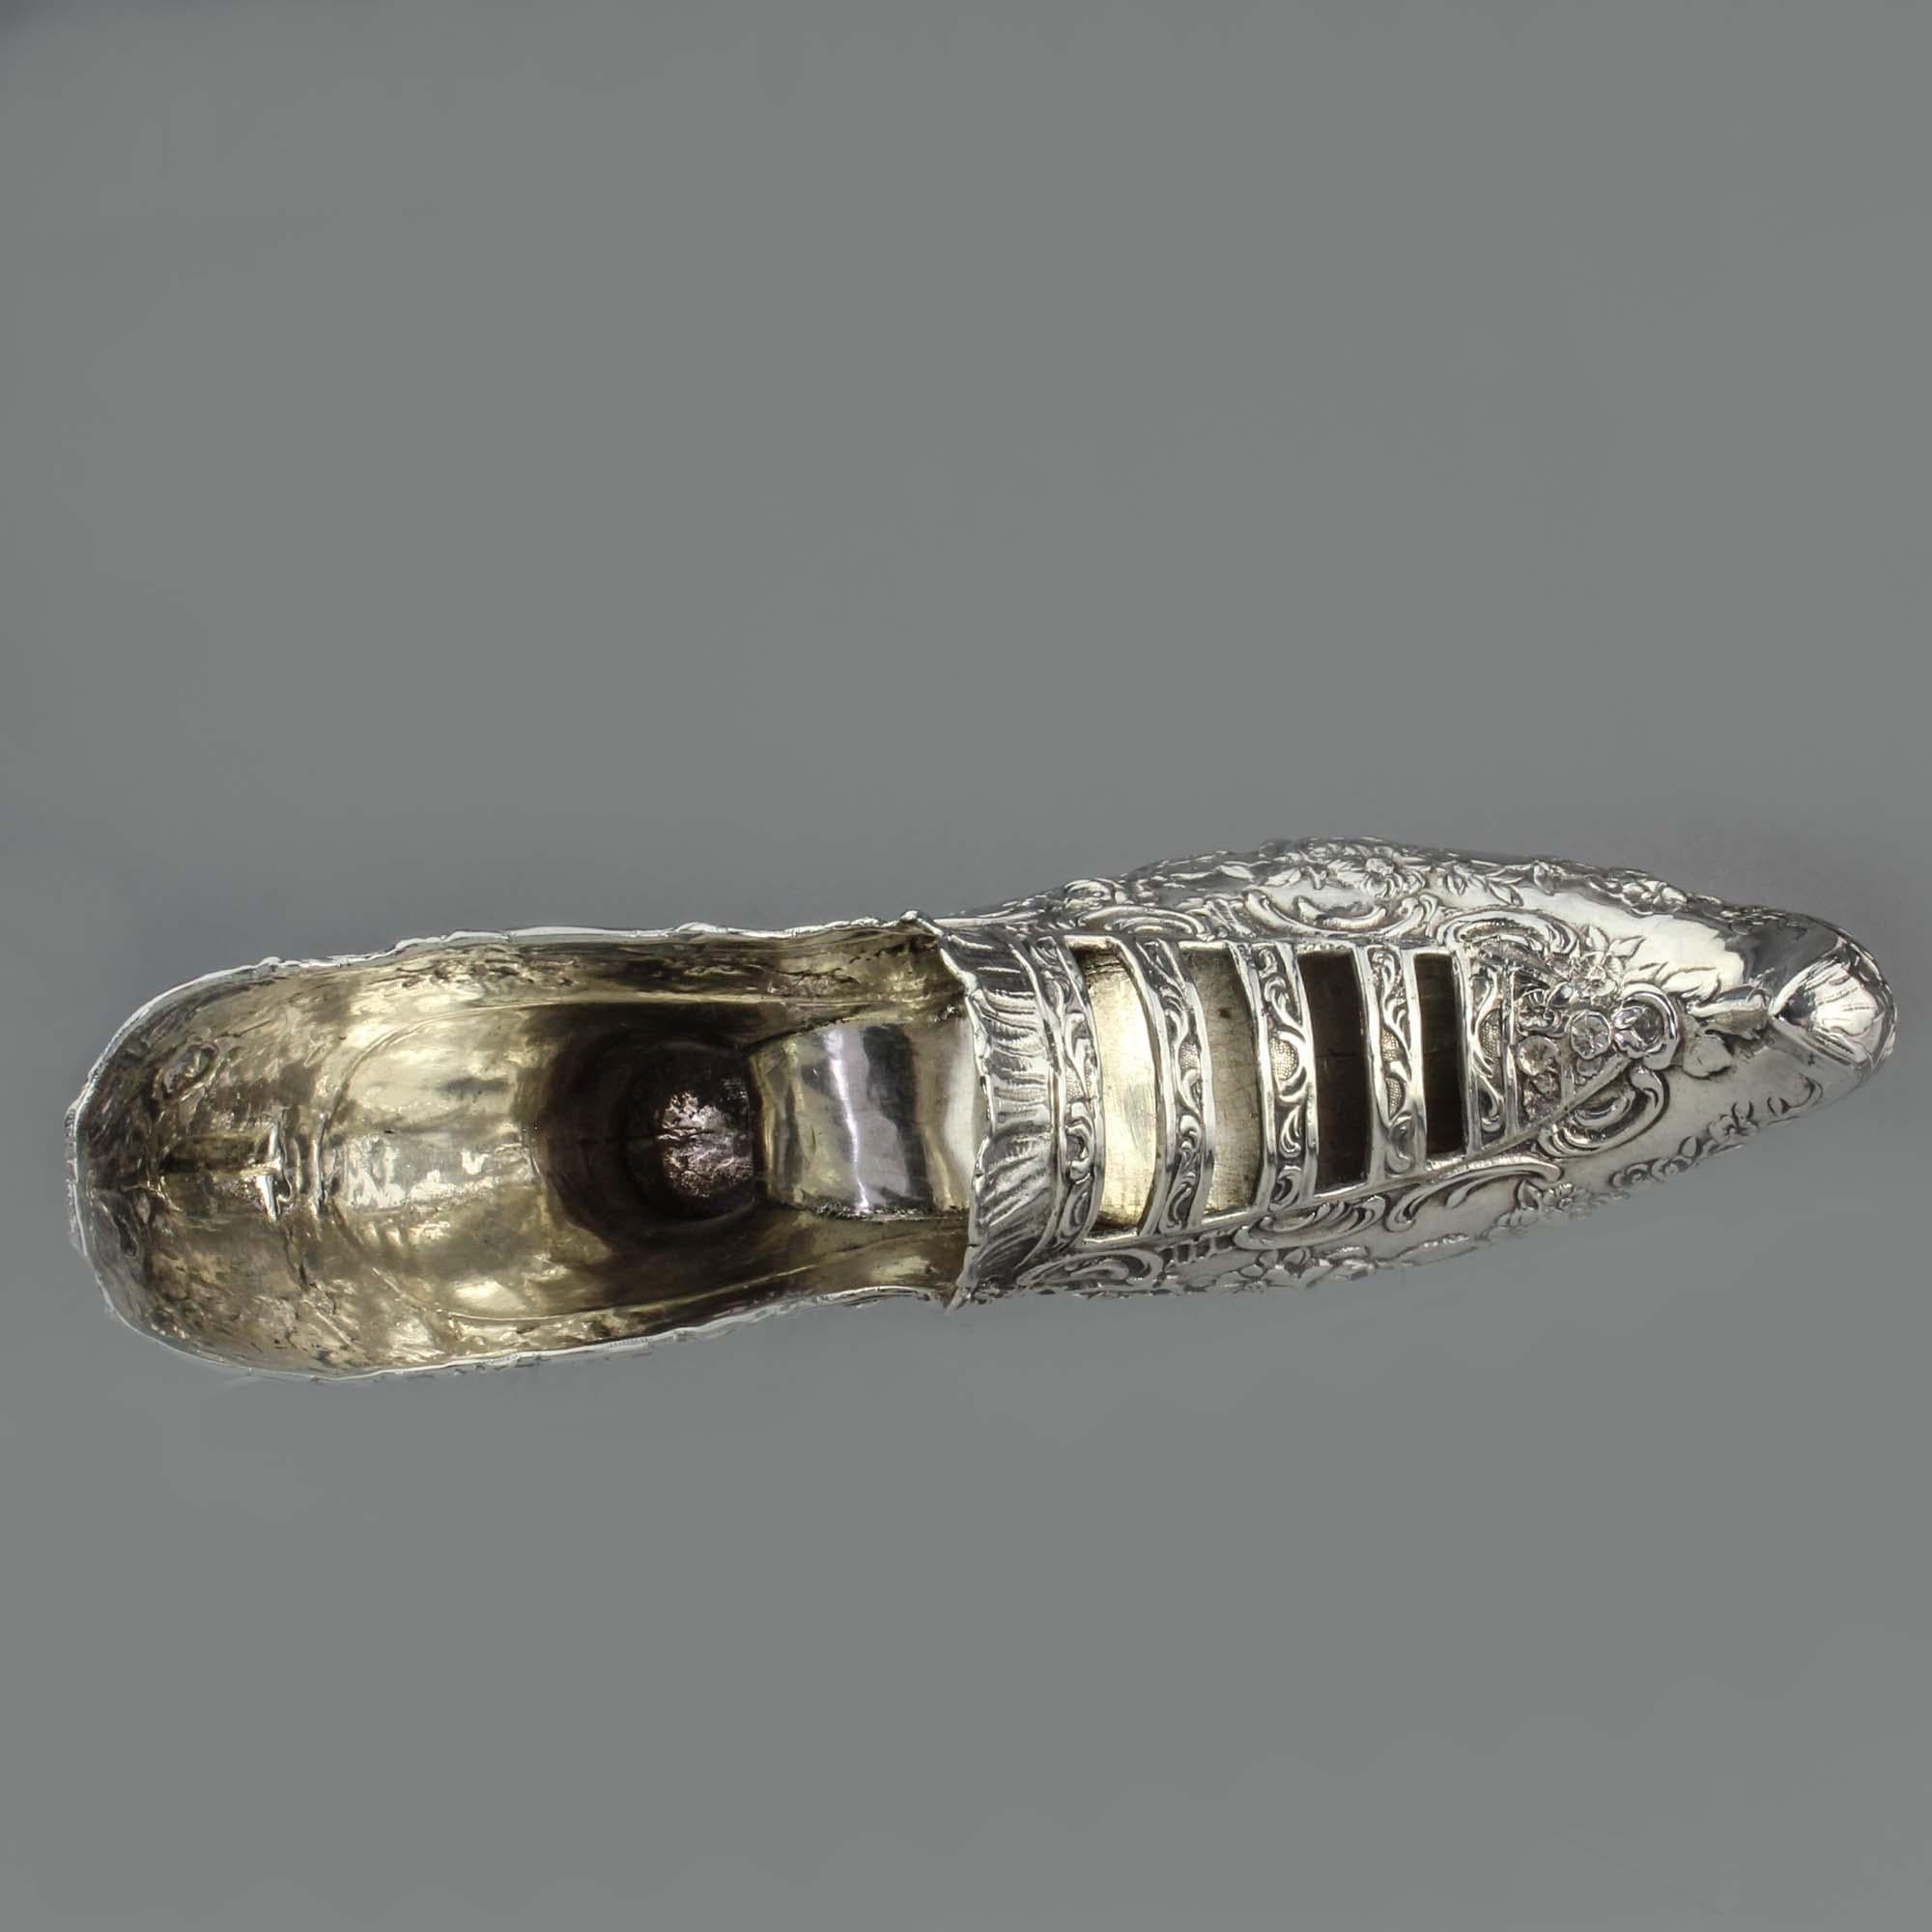 Antique Late 19th Century German 930, Silver Rococo Lady's Shoe with Elf Toe For Sale 4